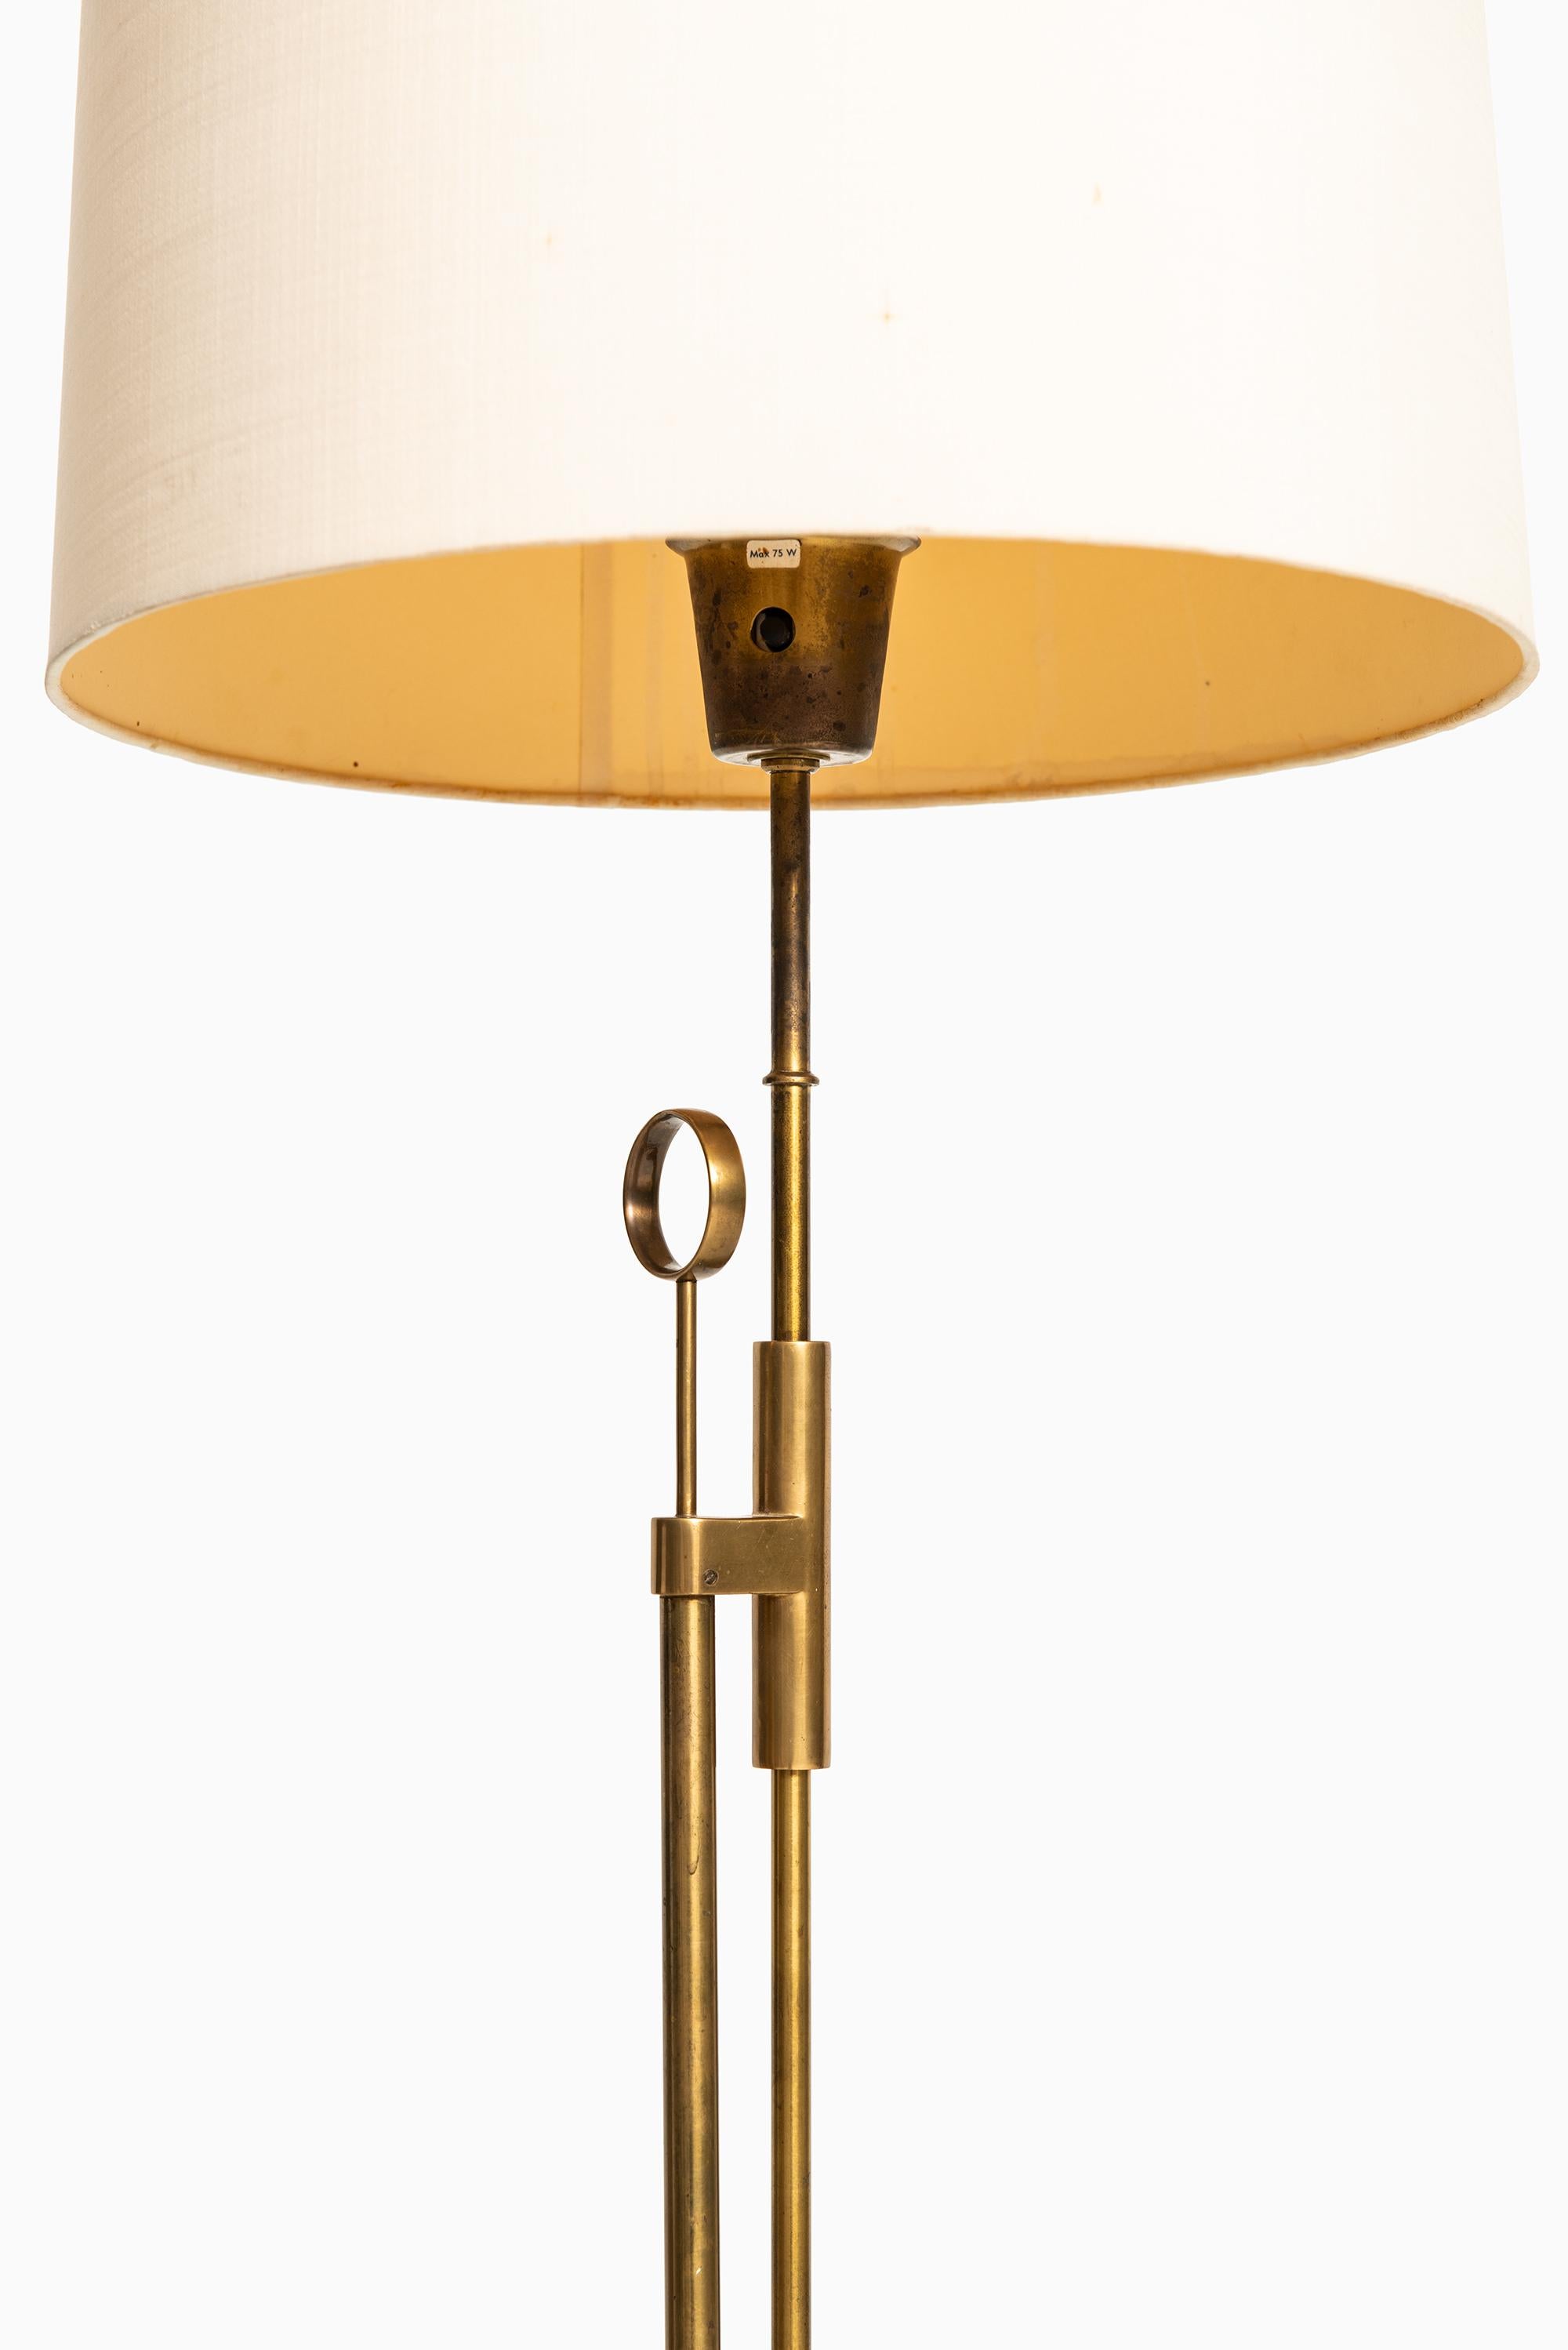 Height adjustable floor lamp. Produced by Falkenbergs Belysnings AB in Sweden.